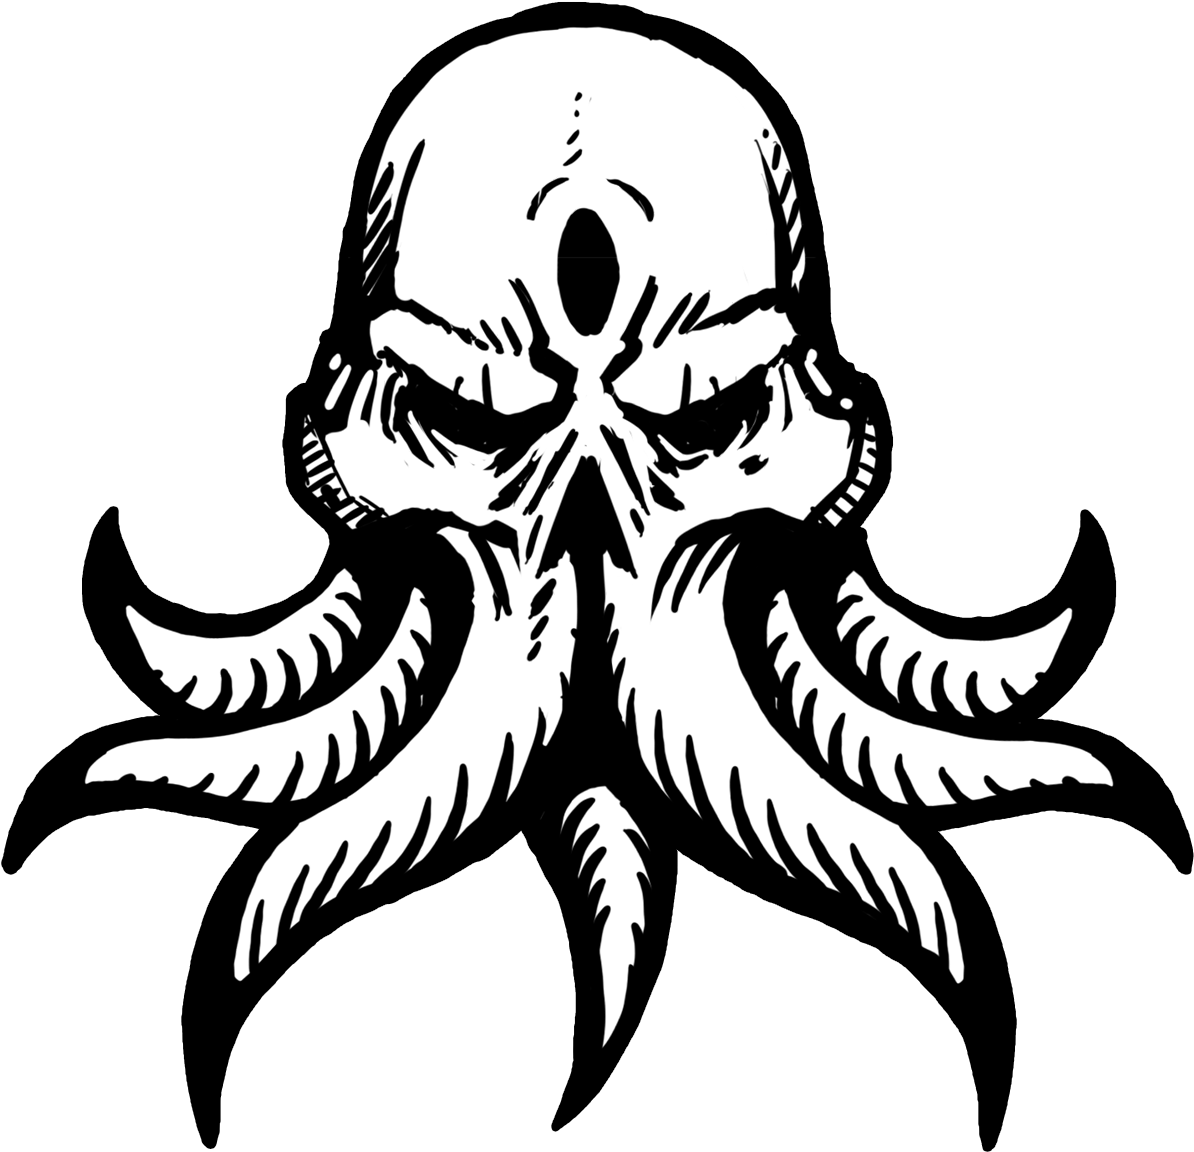 Cthulhu poltopus png taglio